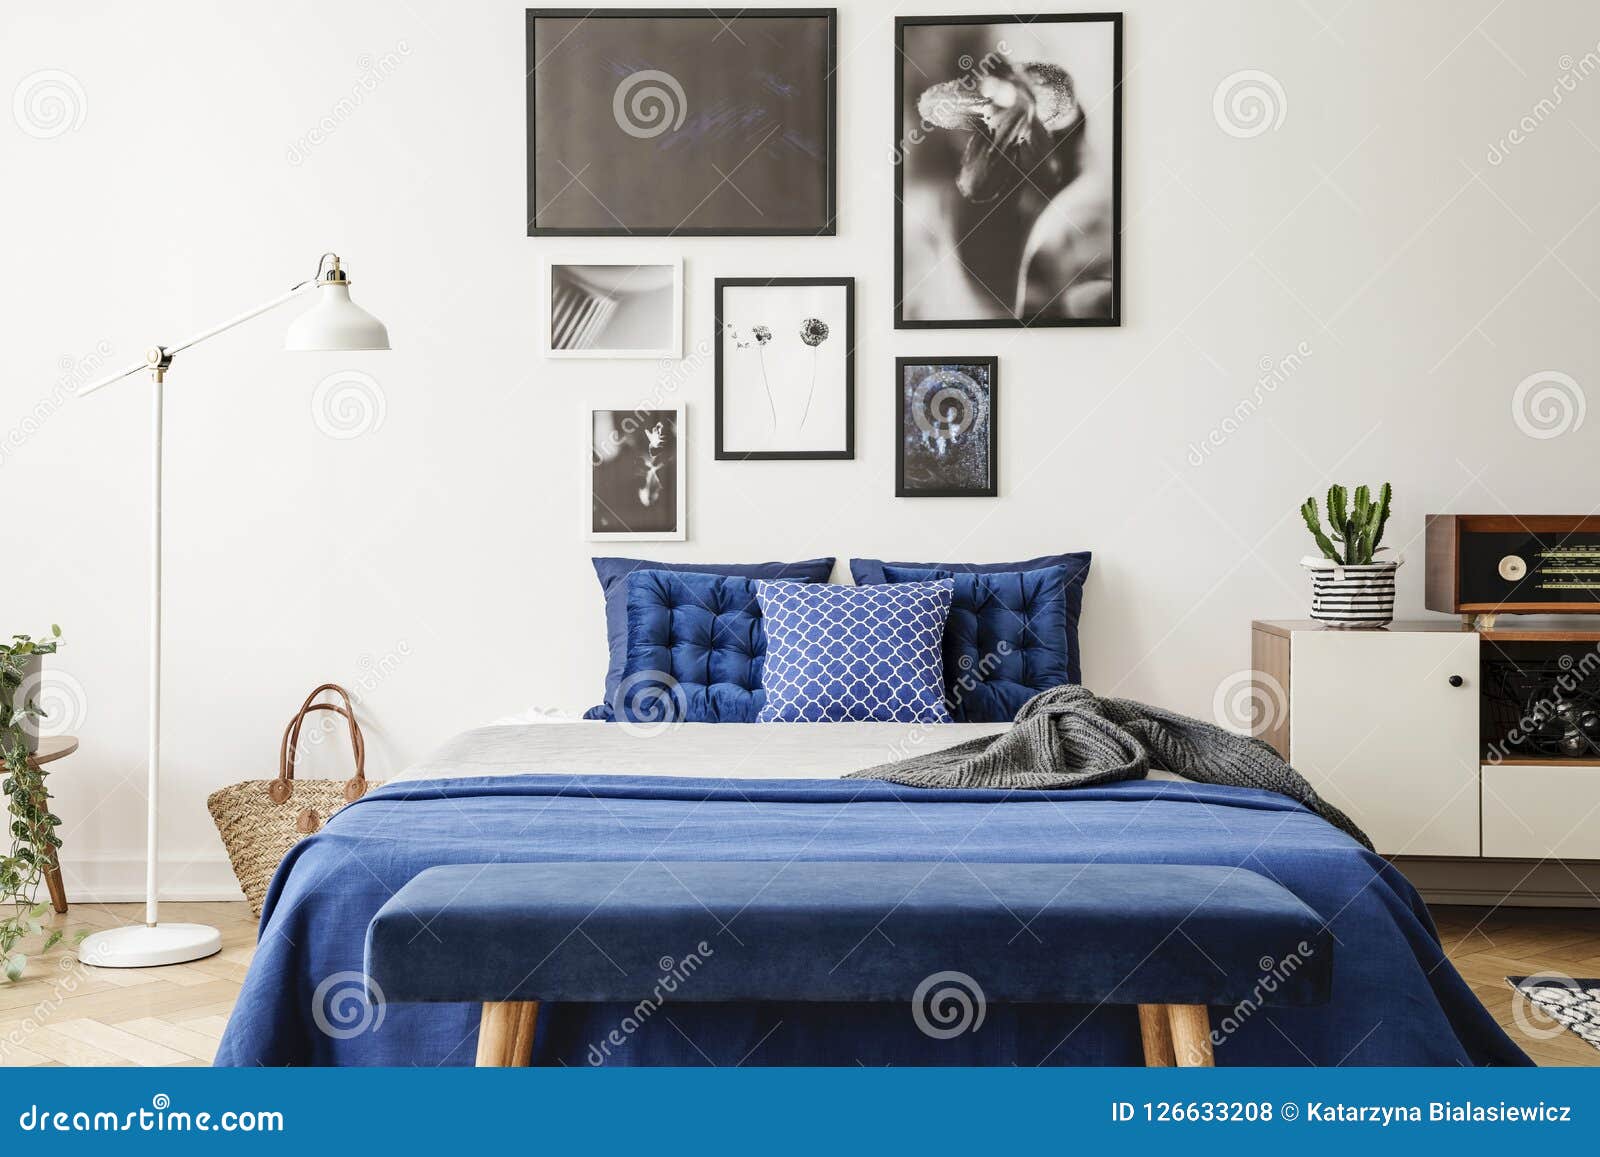 Bench In Front Of Bed With Navy Blue Pillows Between Lamp And Cabinet In Bedroom Interior Real Photo Stock Photo Image Of Bedding Plant 126633208